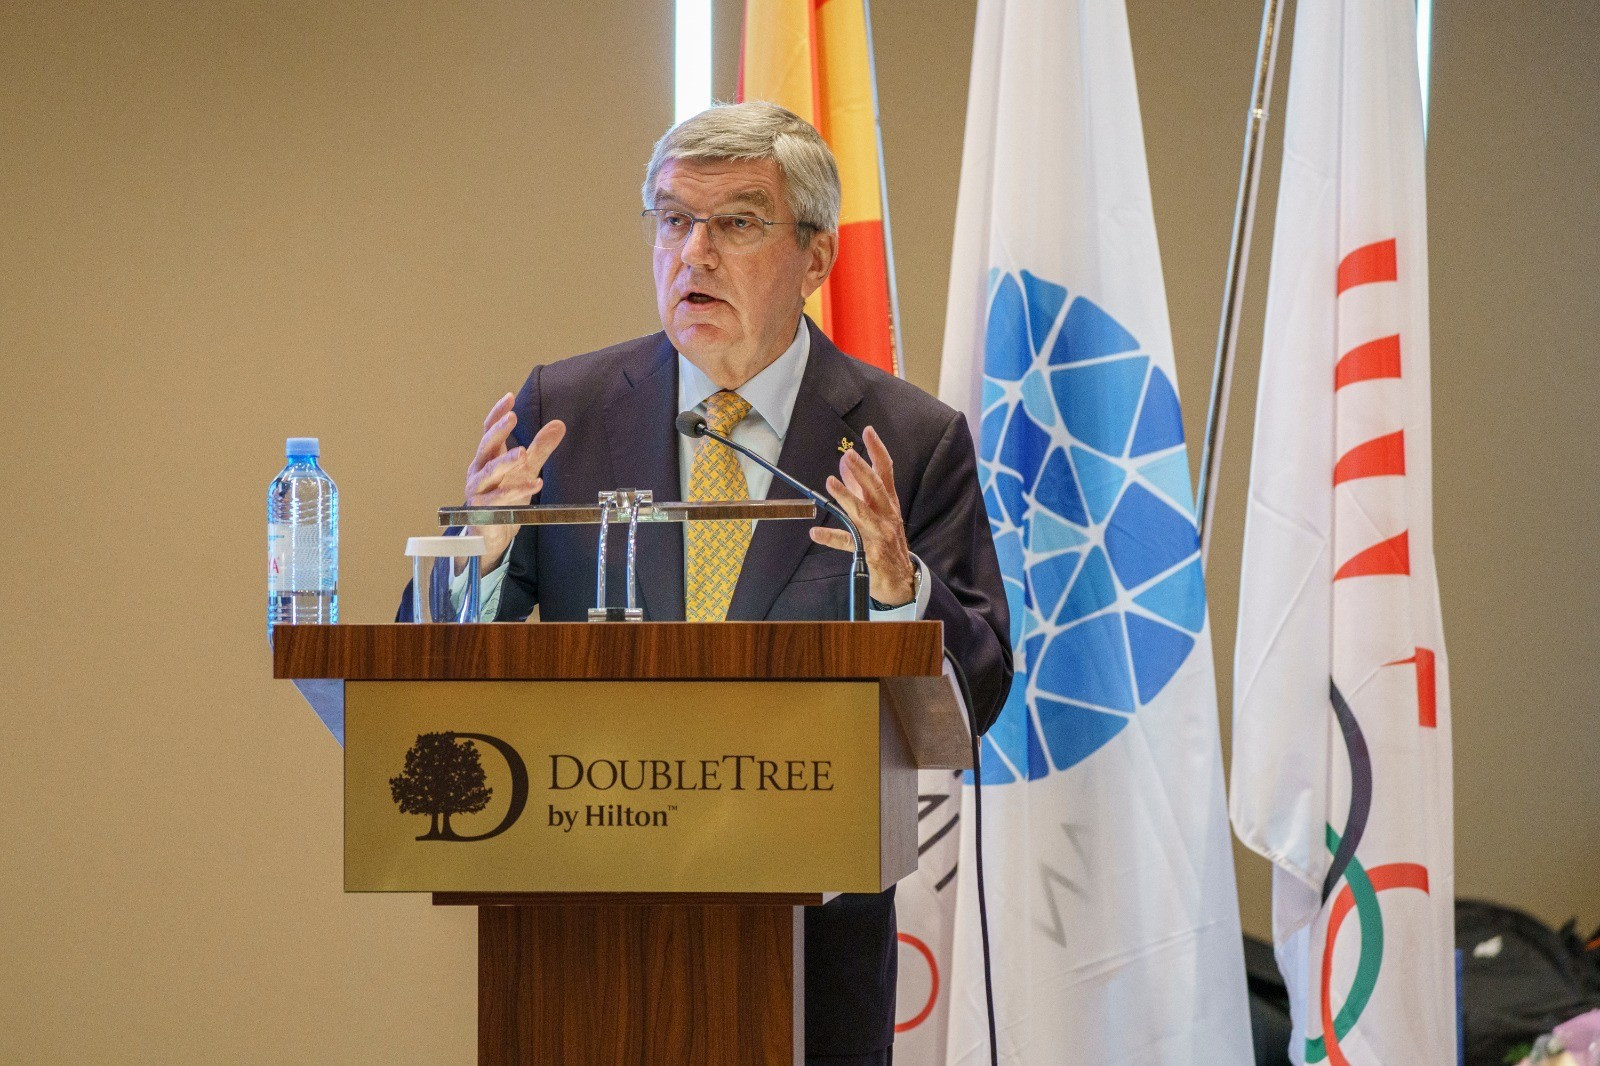 IOC President Thomas Bach yesterday at the EOC General Assembly cautioned that sports organisations 